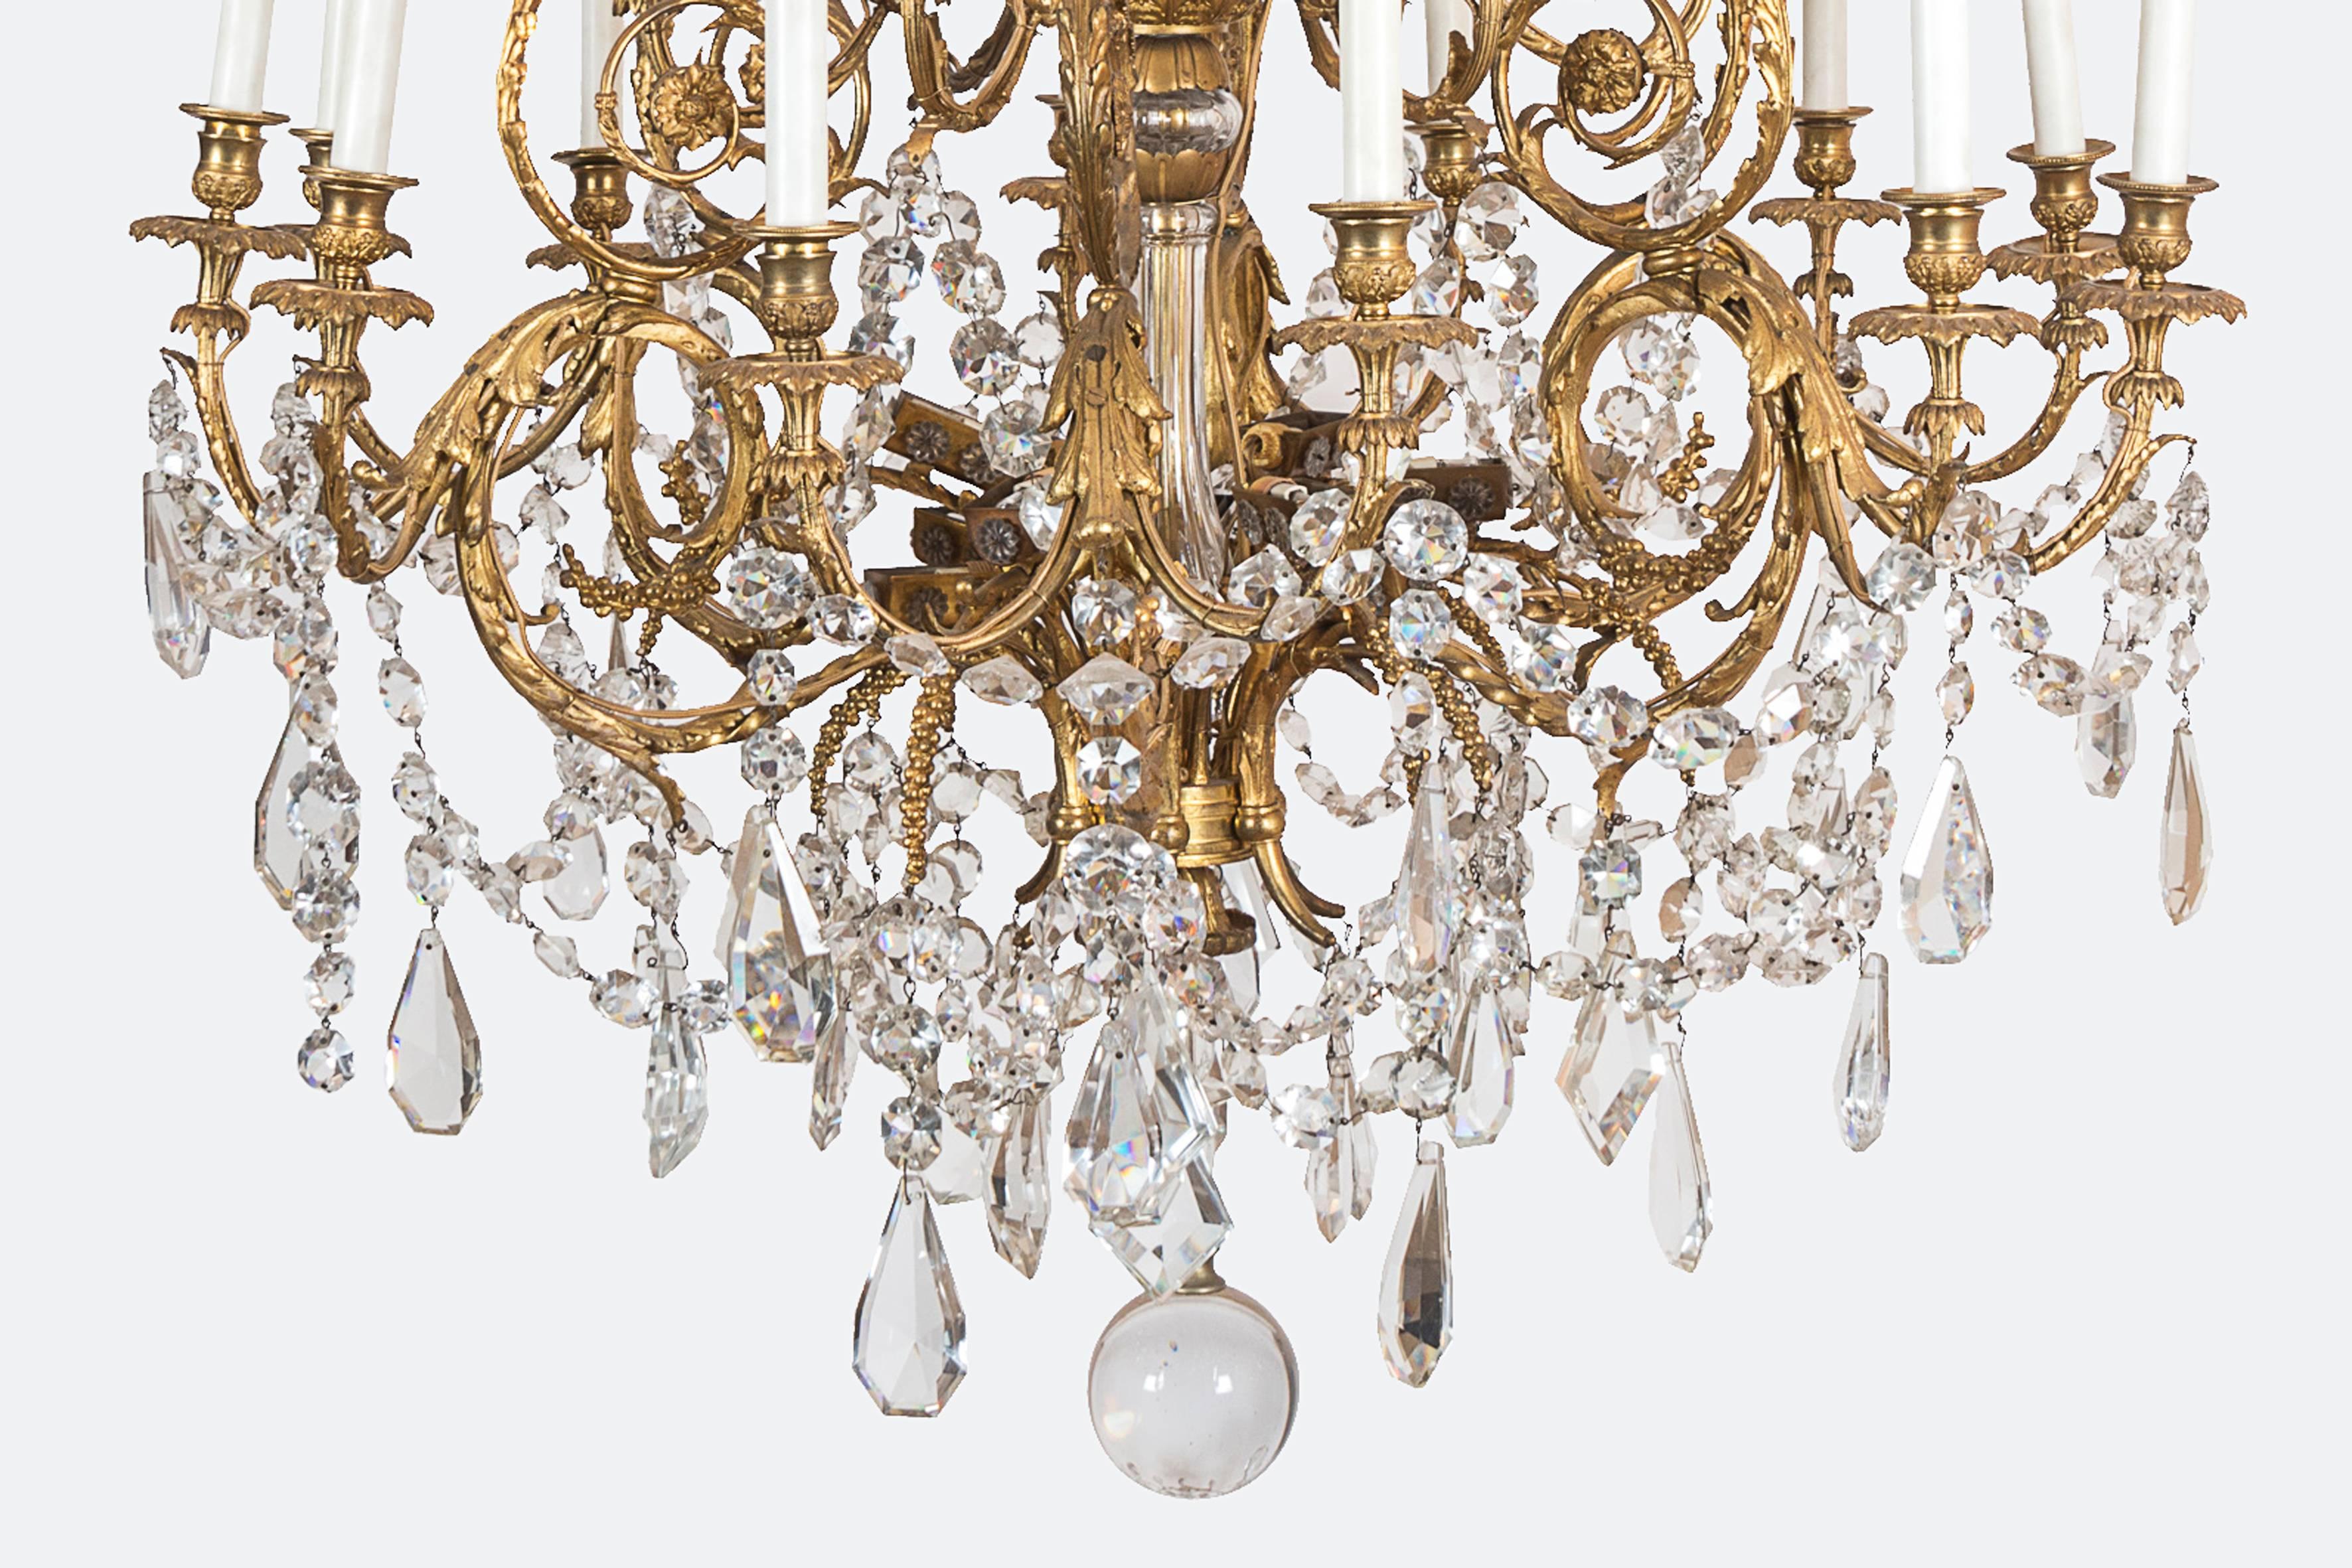 Gilt bronze and crystal chandelier, indirect lighting, drops and crystal flowers.